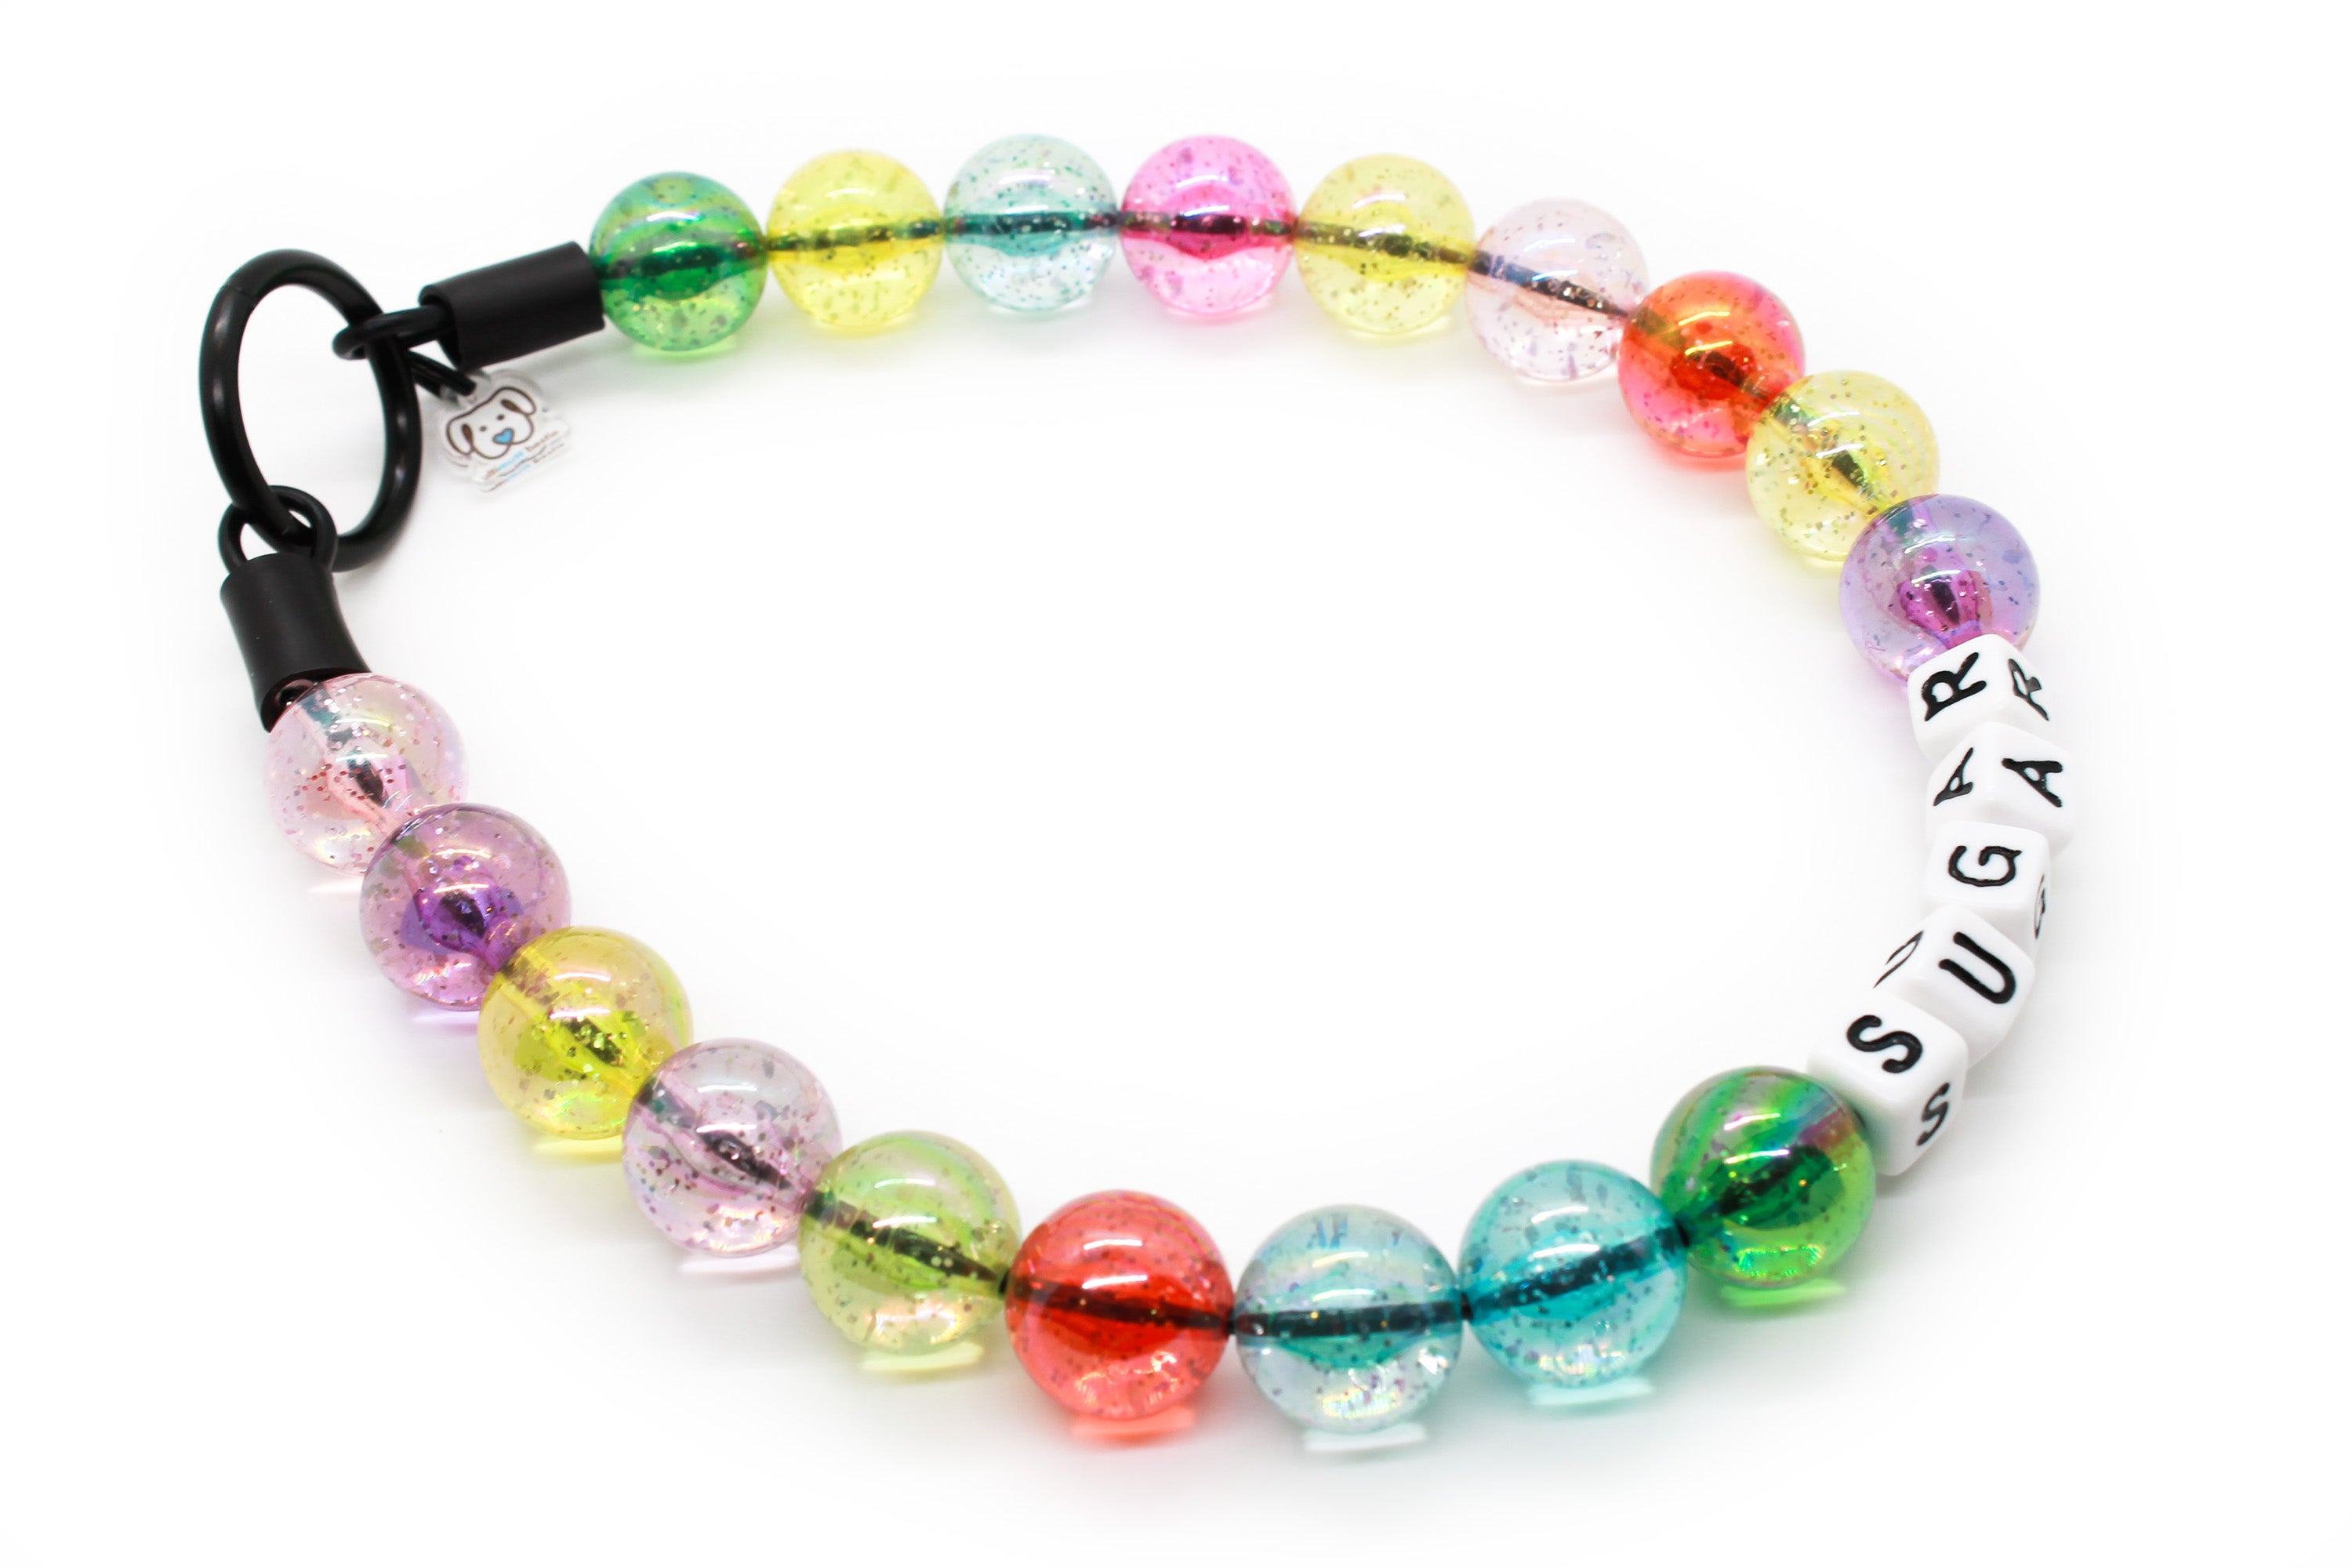 Jelly Fish Glitter dog bead collar with black o ring closure.  An array of pastel translucent resin glitter beads a rainbow pattern 